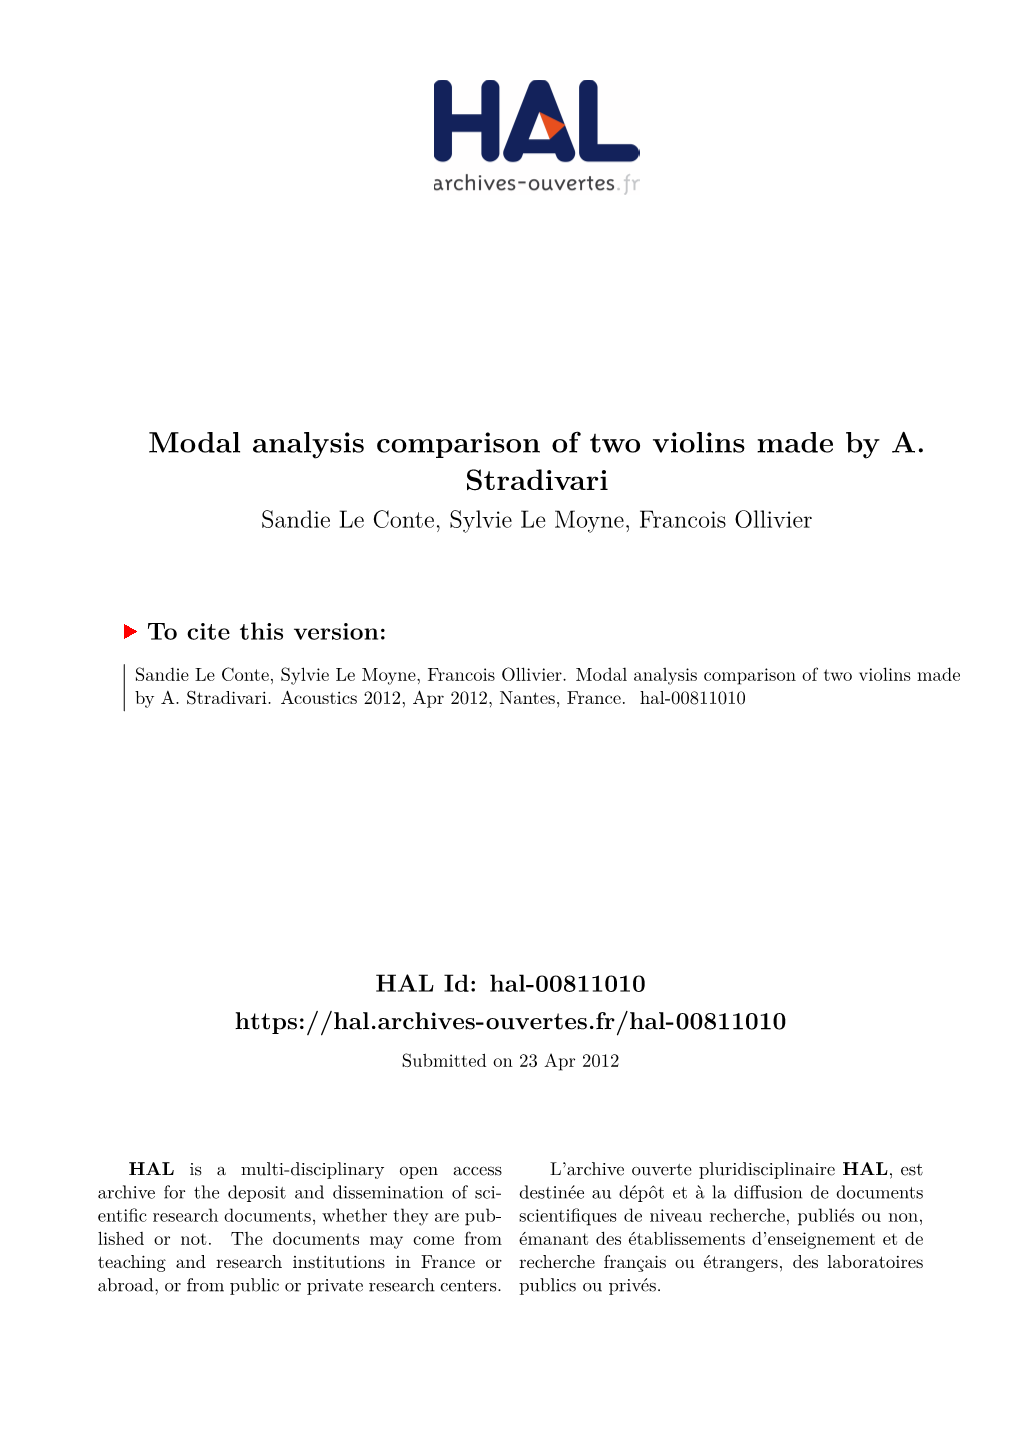 Modal Analysis Comparison of Two Violins Made by A. Stradivari Sandie Le Conte, Sylvie Le Moyne, Francois Ollivier